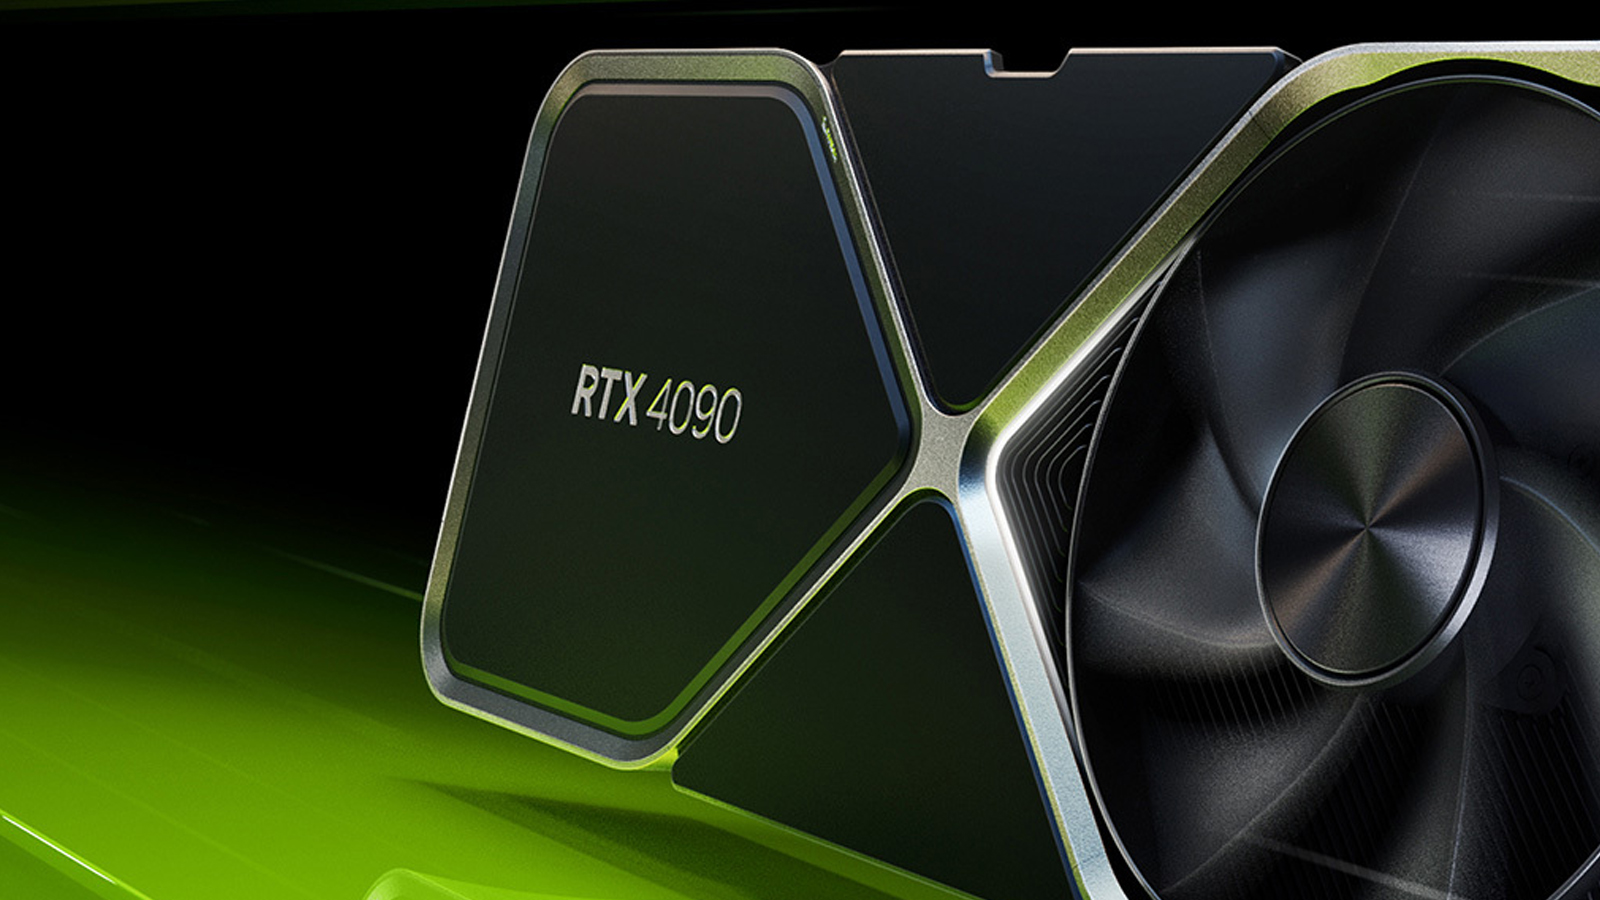 Nvidia RTX 4090 Ti GPU might be inbound, but forget about that RTX Titan